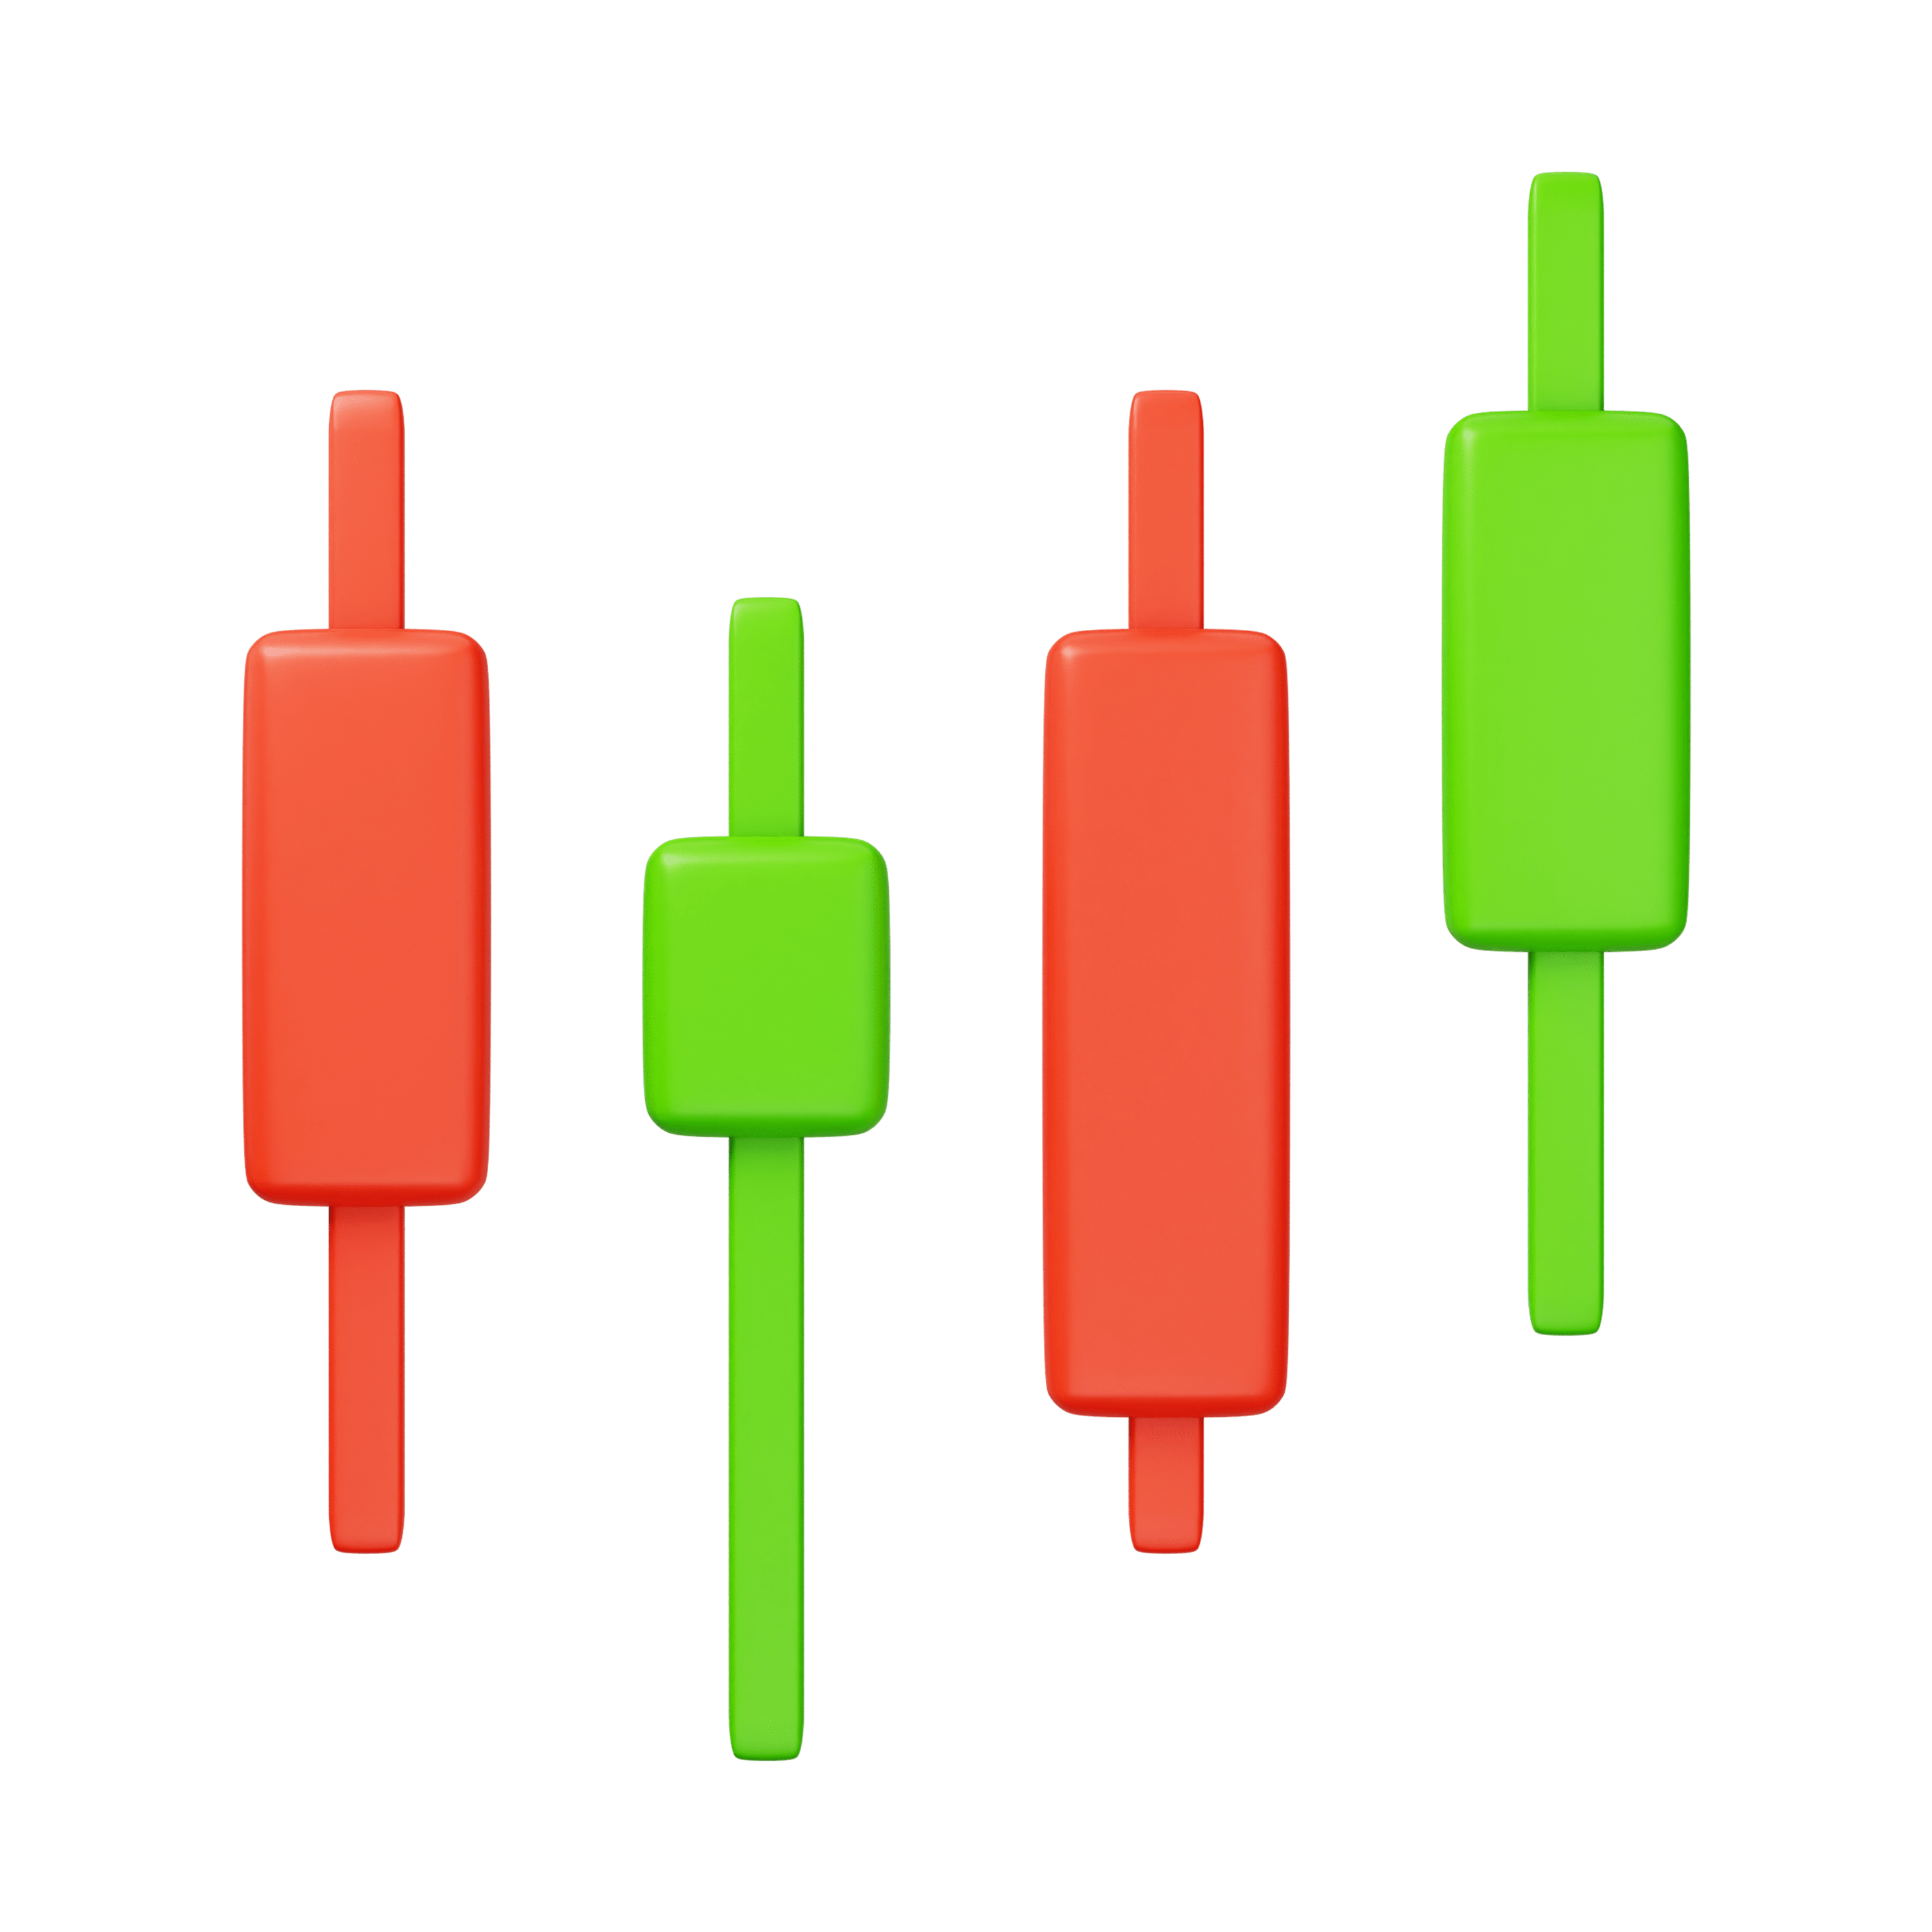 —Pngtree—candlestick graph 3d icon render 8734887